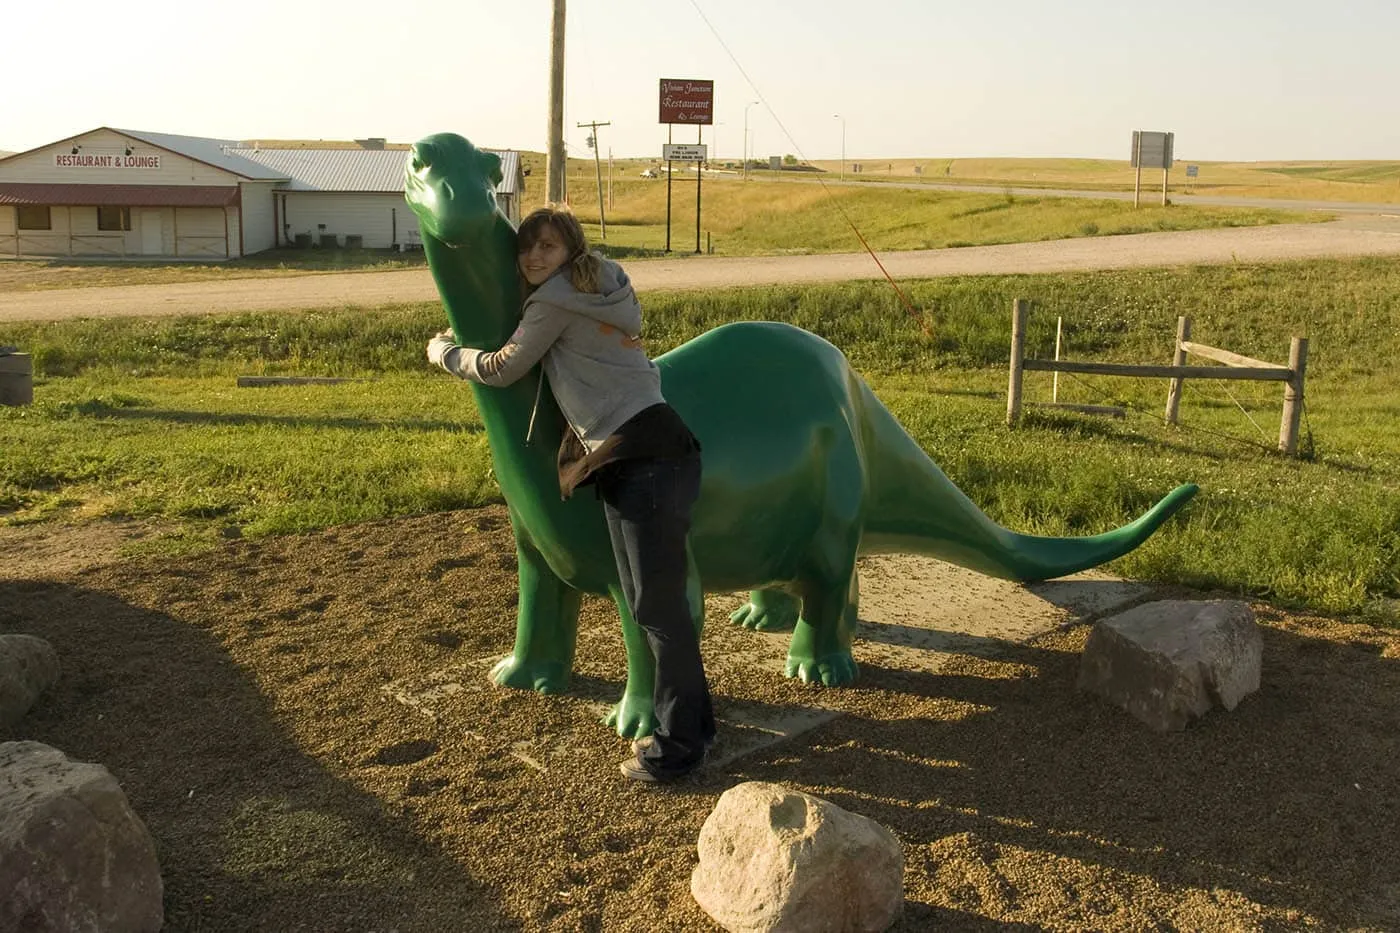 Dinosaur Roadside Attractions - The Sinclair Oil Dinosaur at a Gas Station in South Dakota.